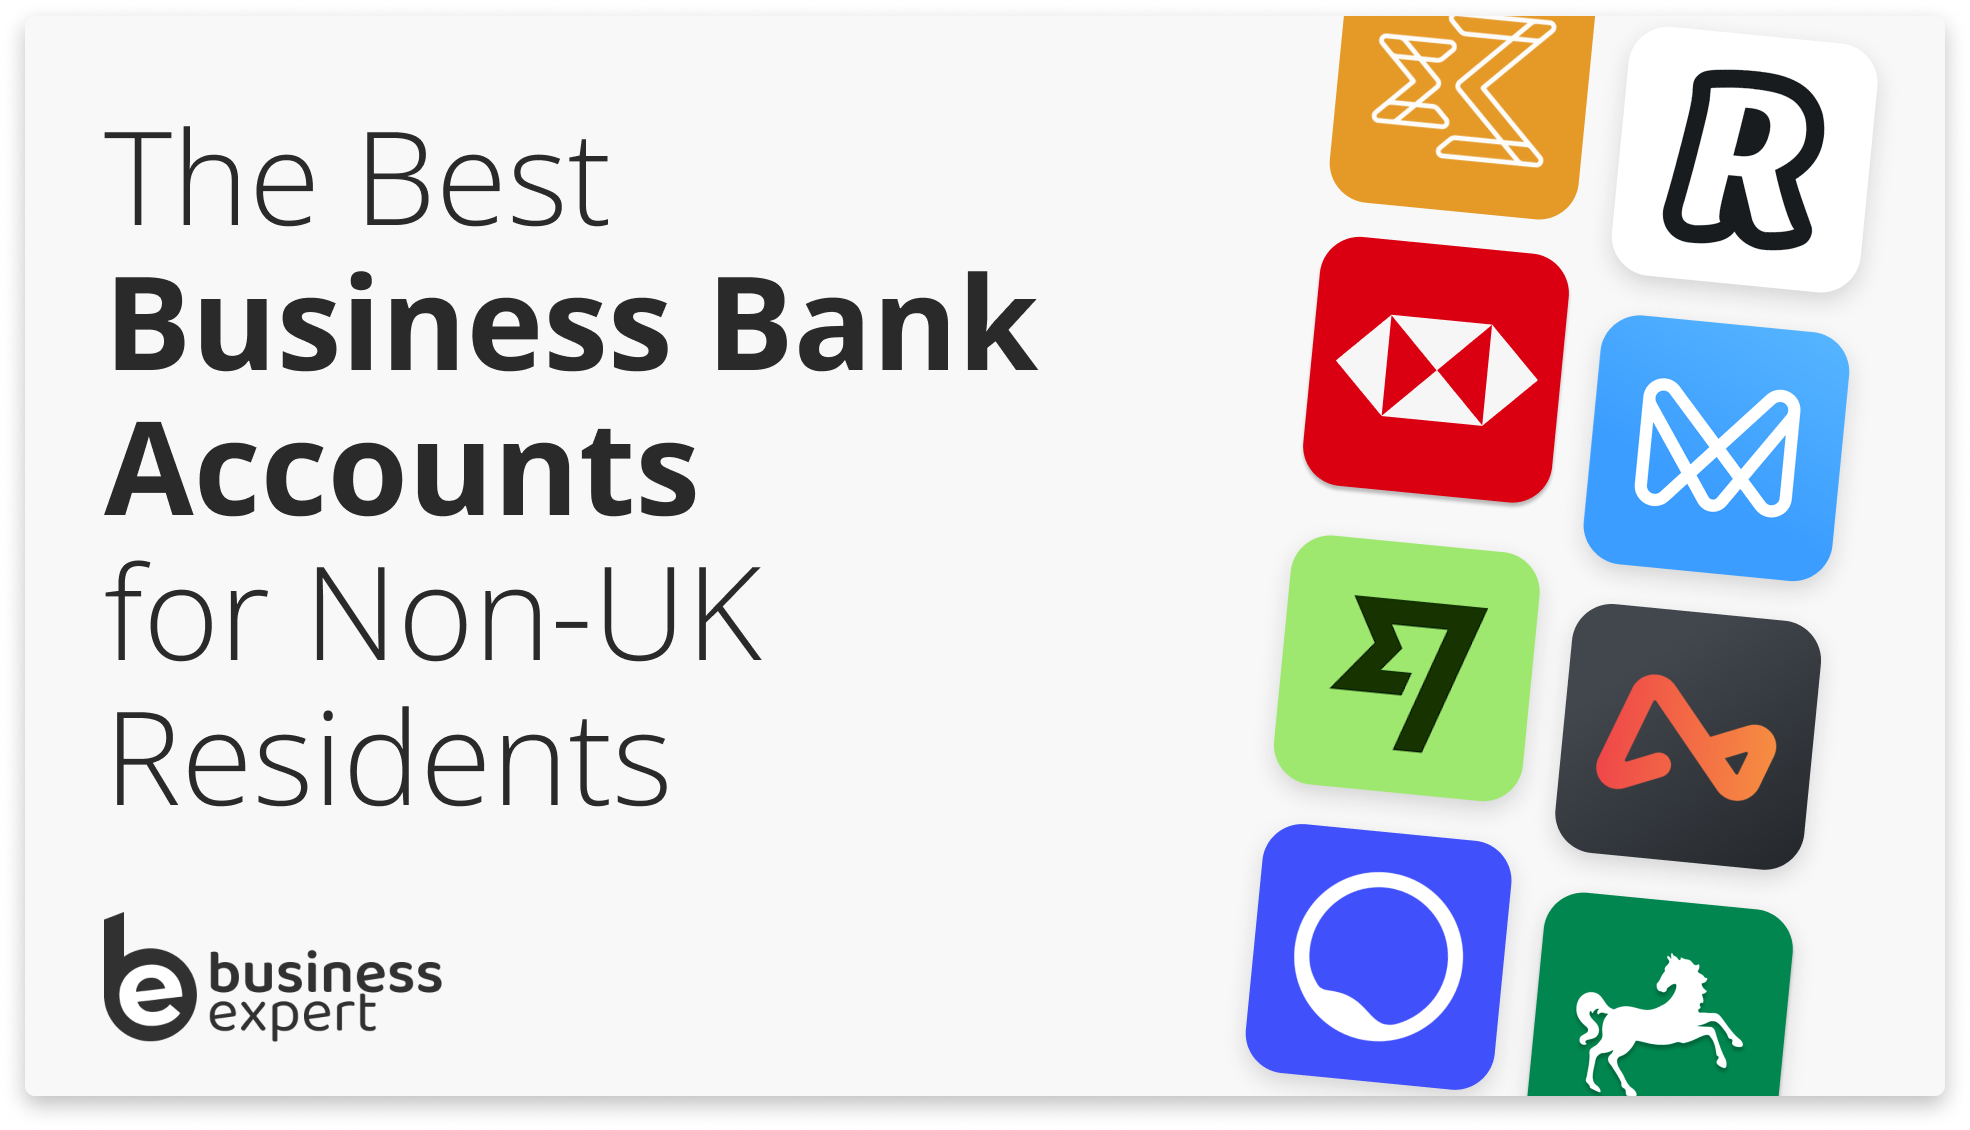 Best Business Account for Non-UK Residents